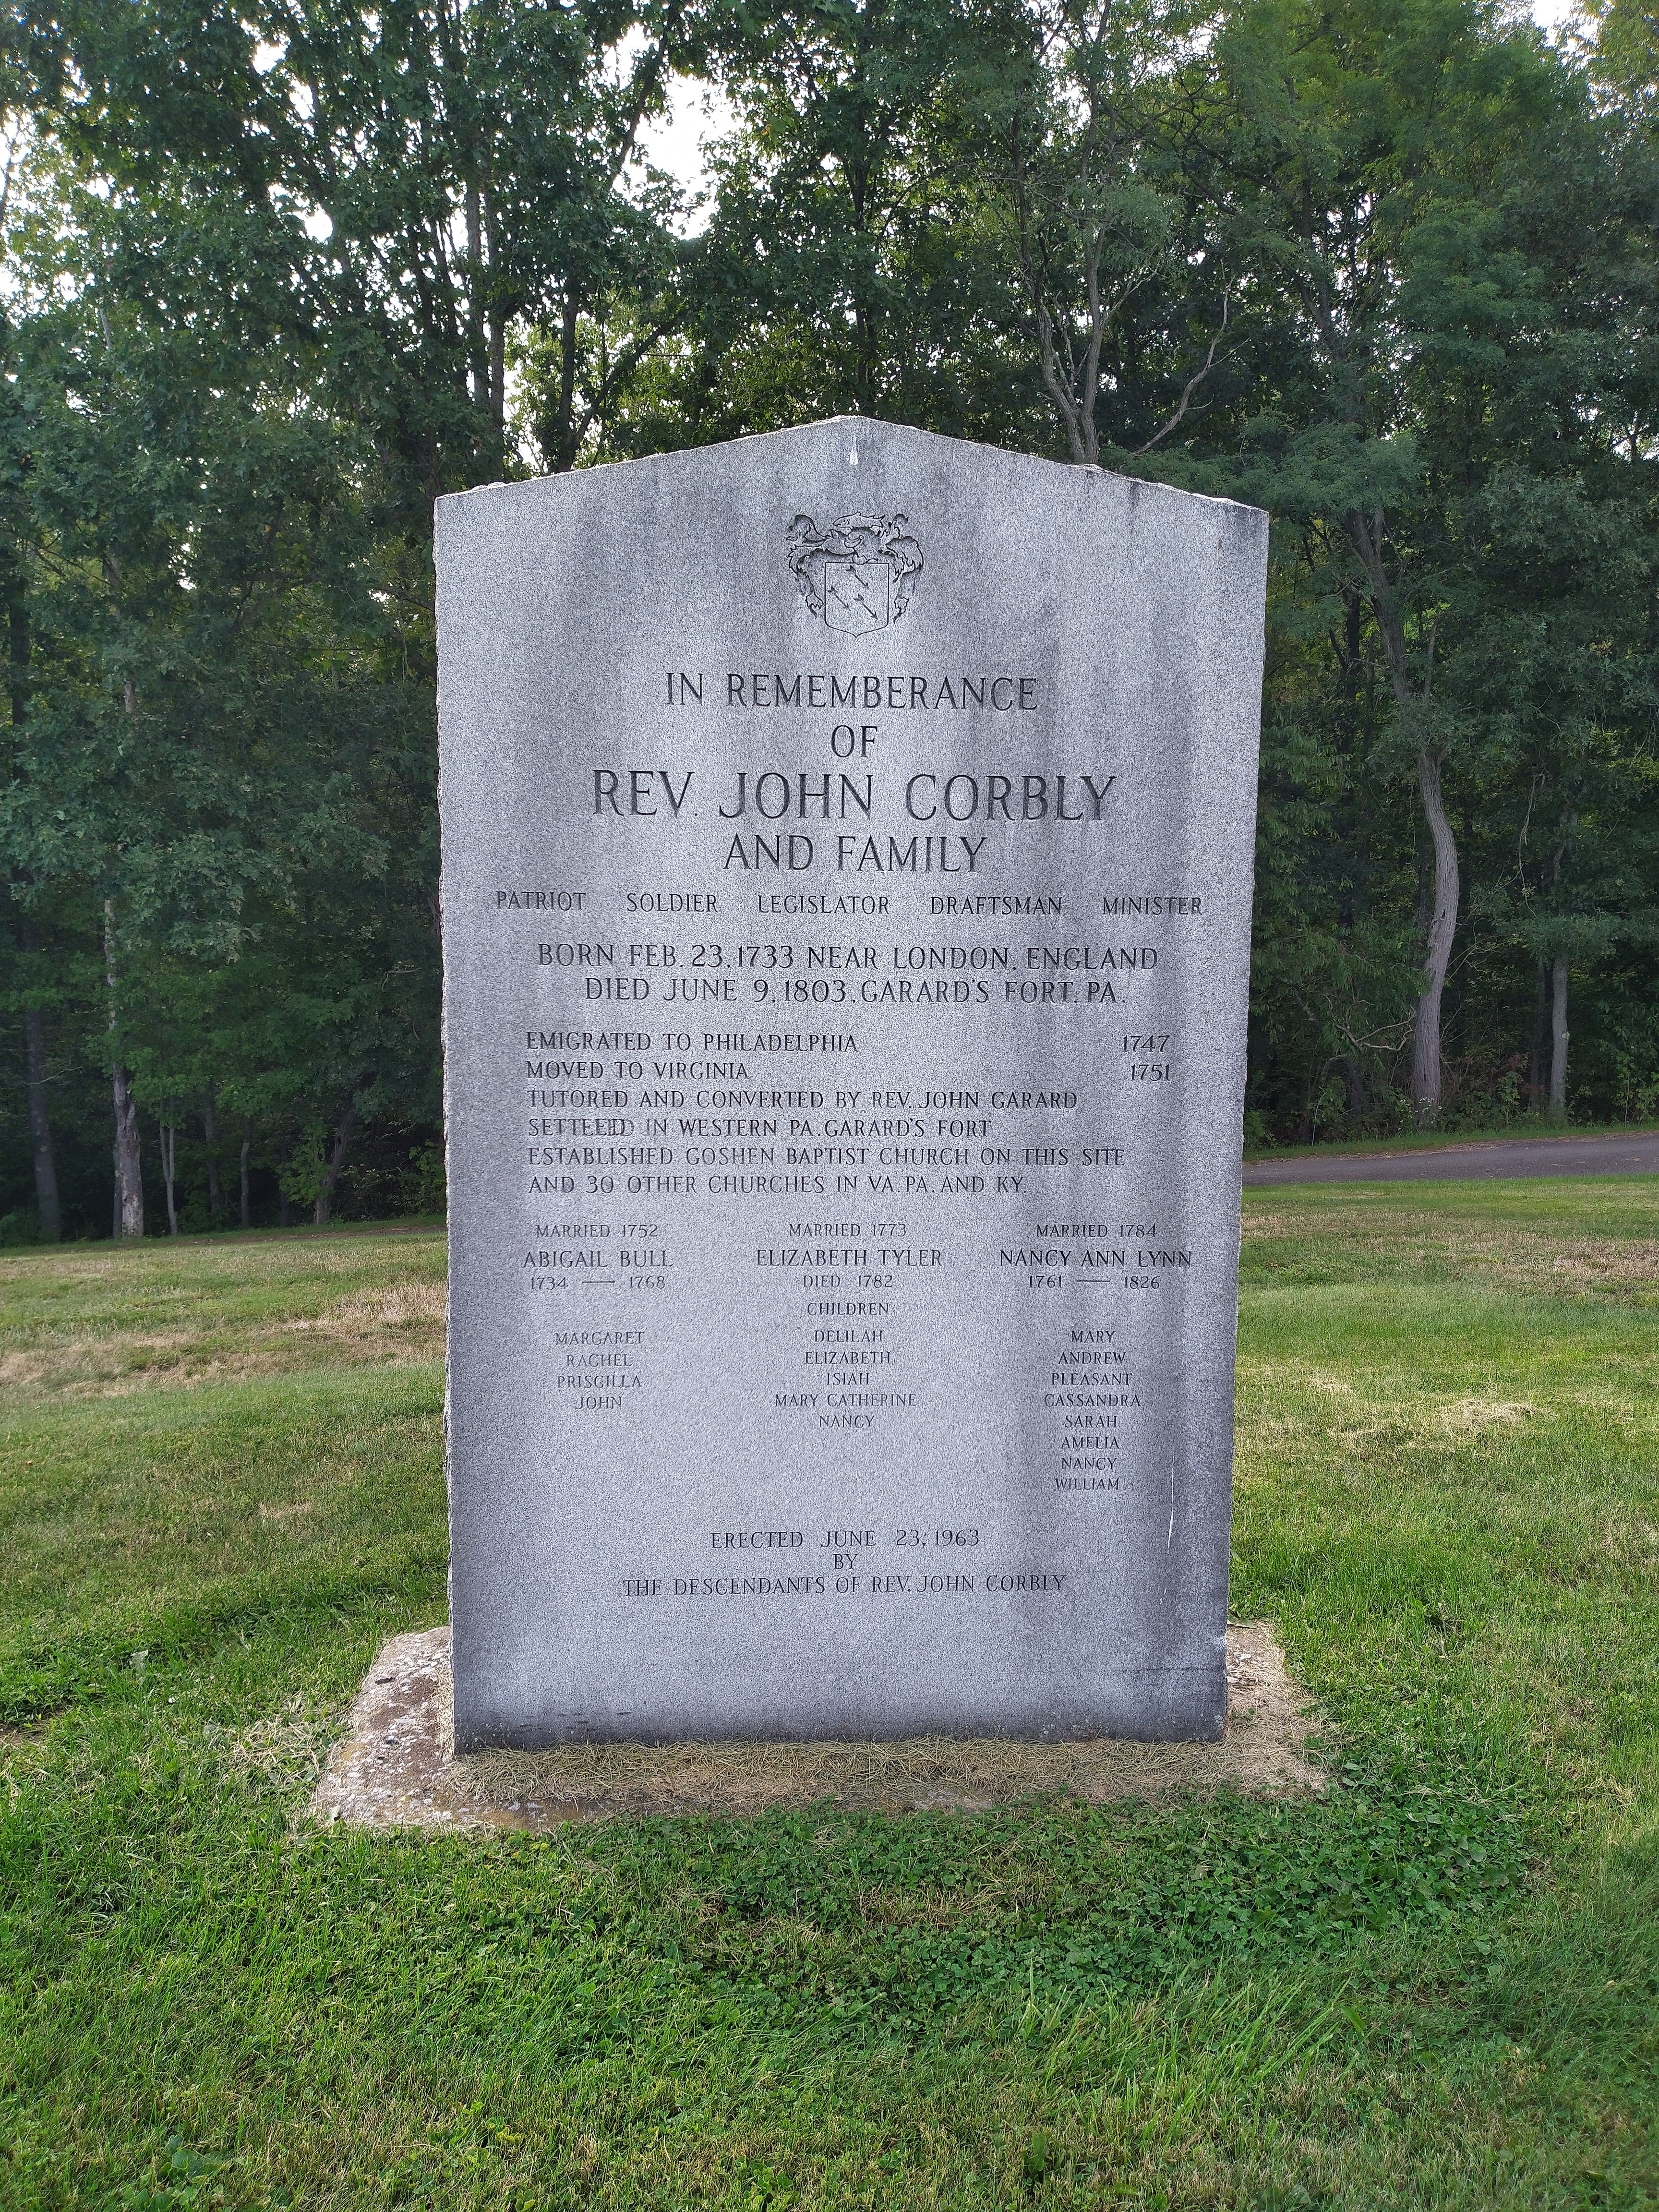 Memorial to John Corbly and family in the Garard's Fort Cemetary